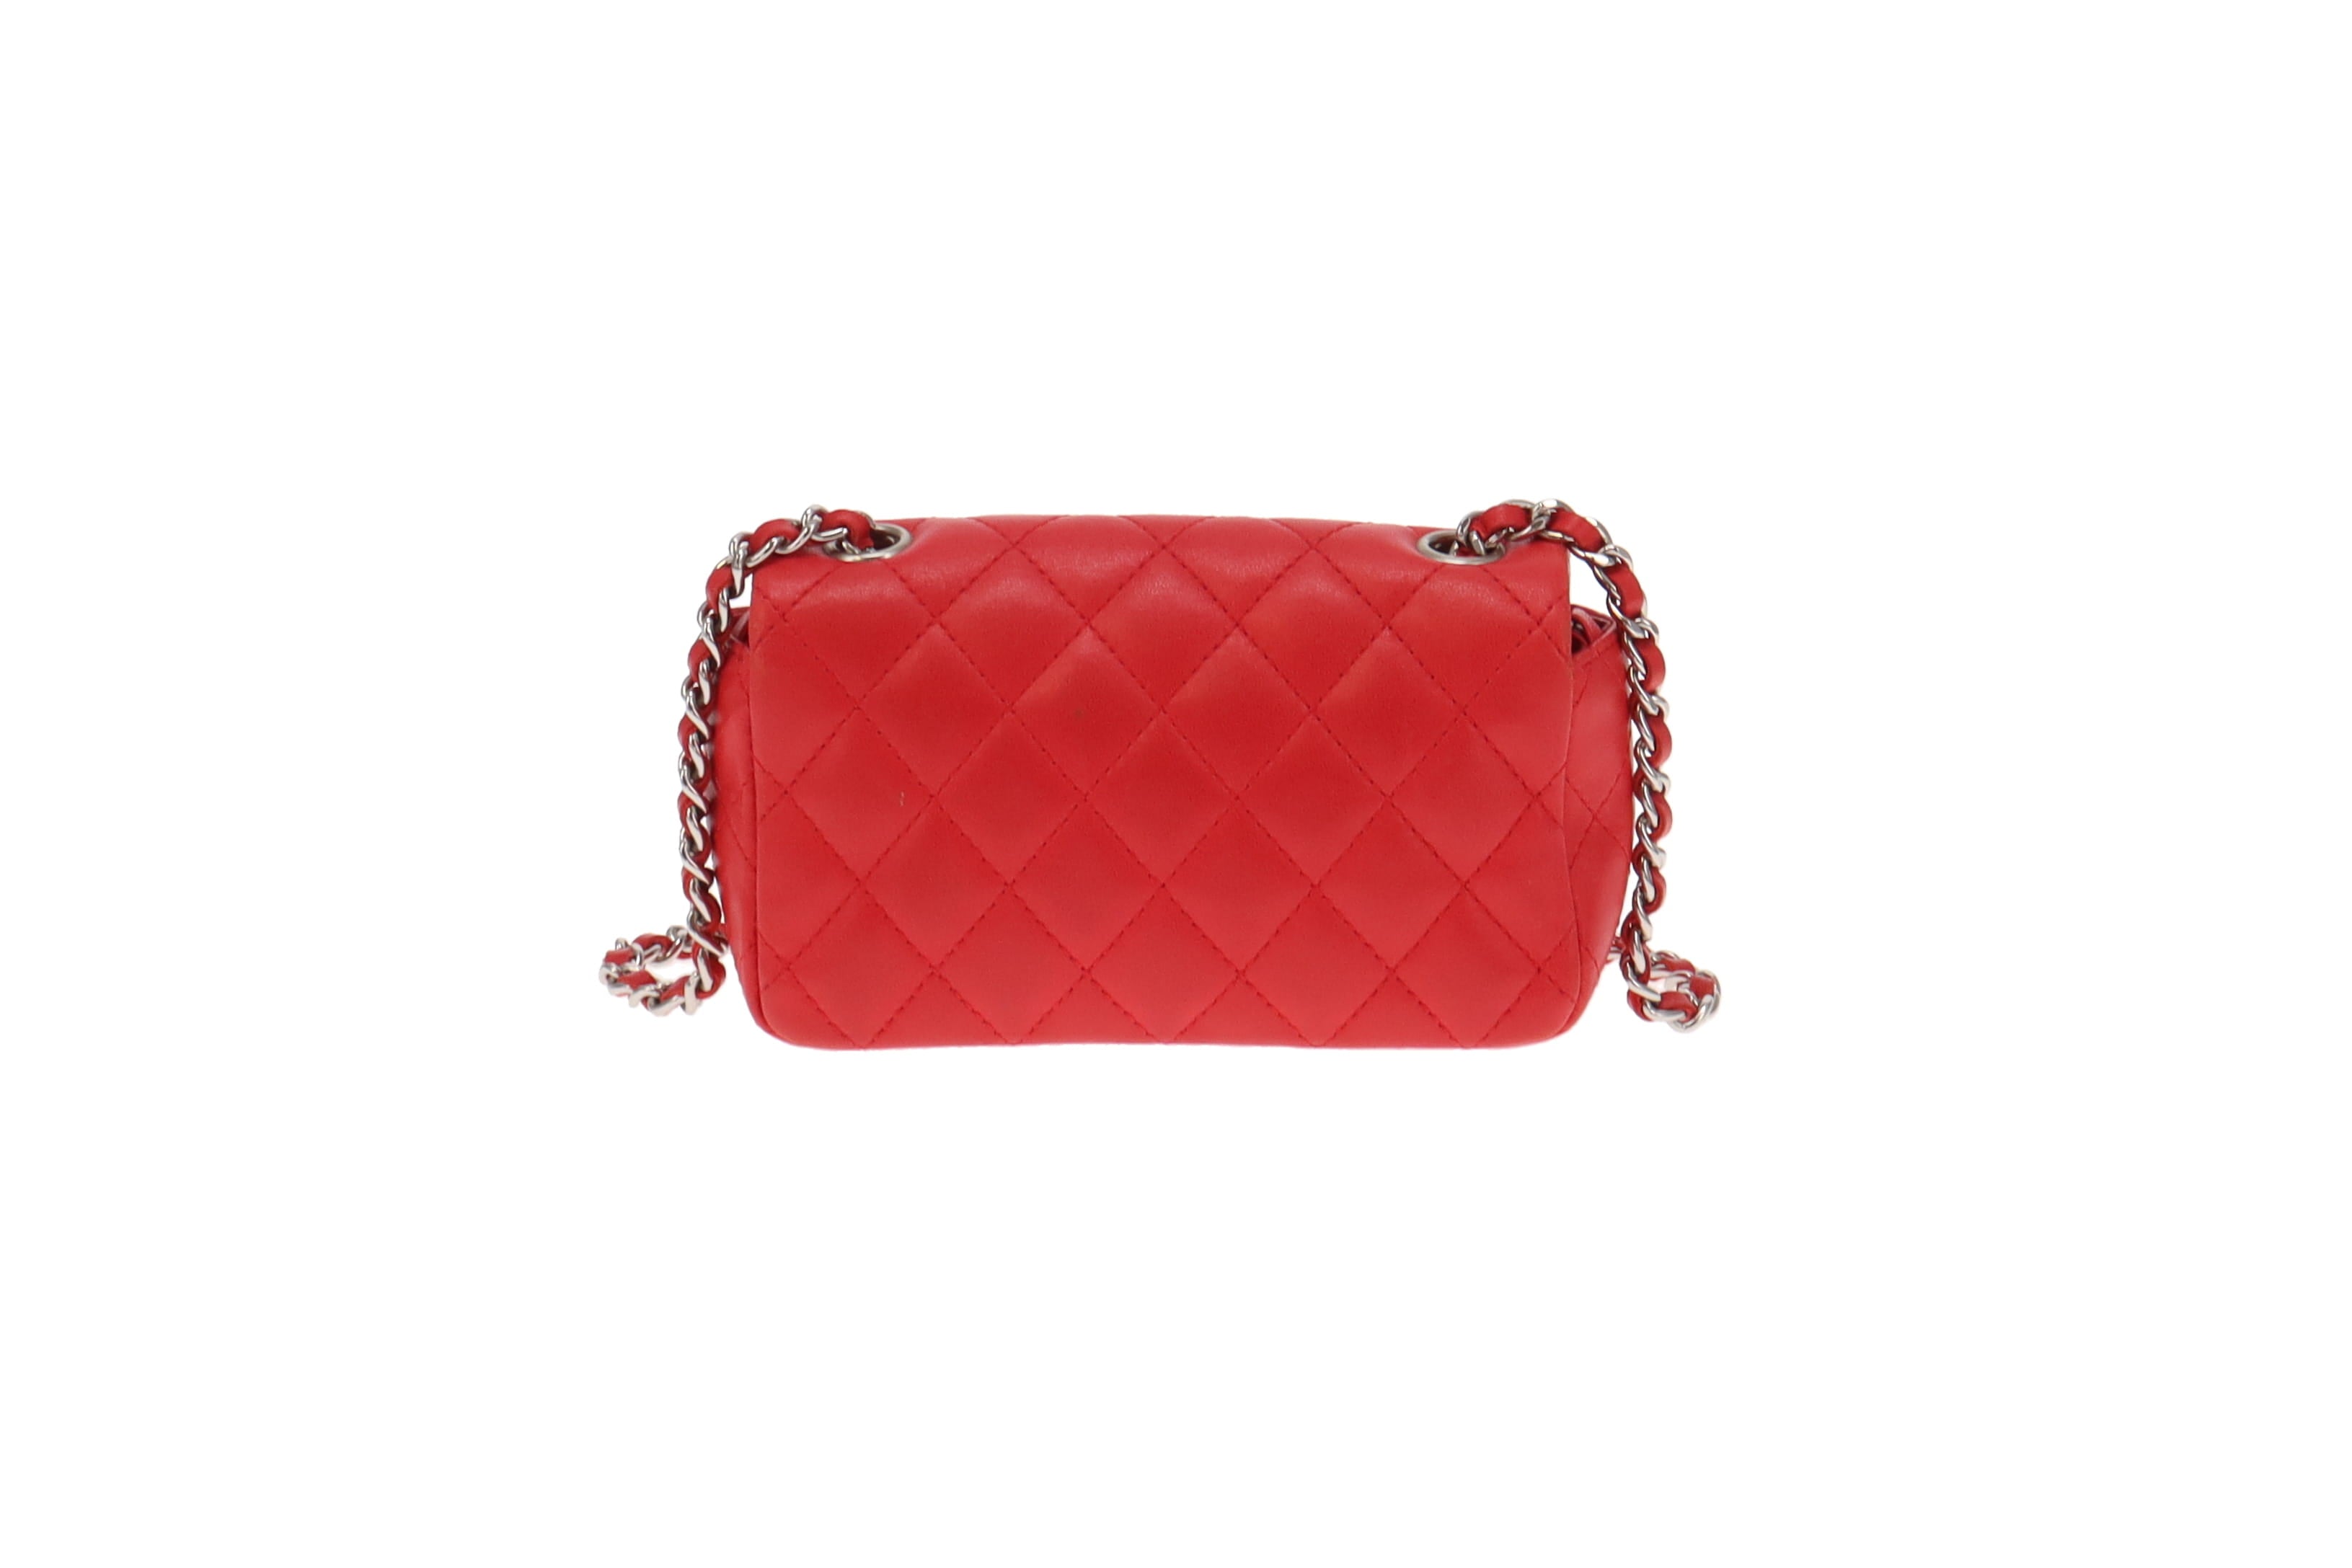 mini chanel bag  Red chanel Chanel bag outfit Chanel bag red